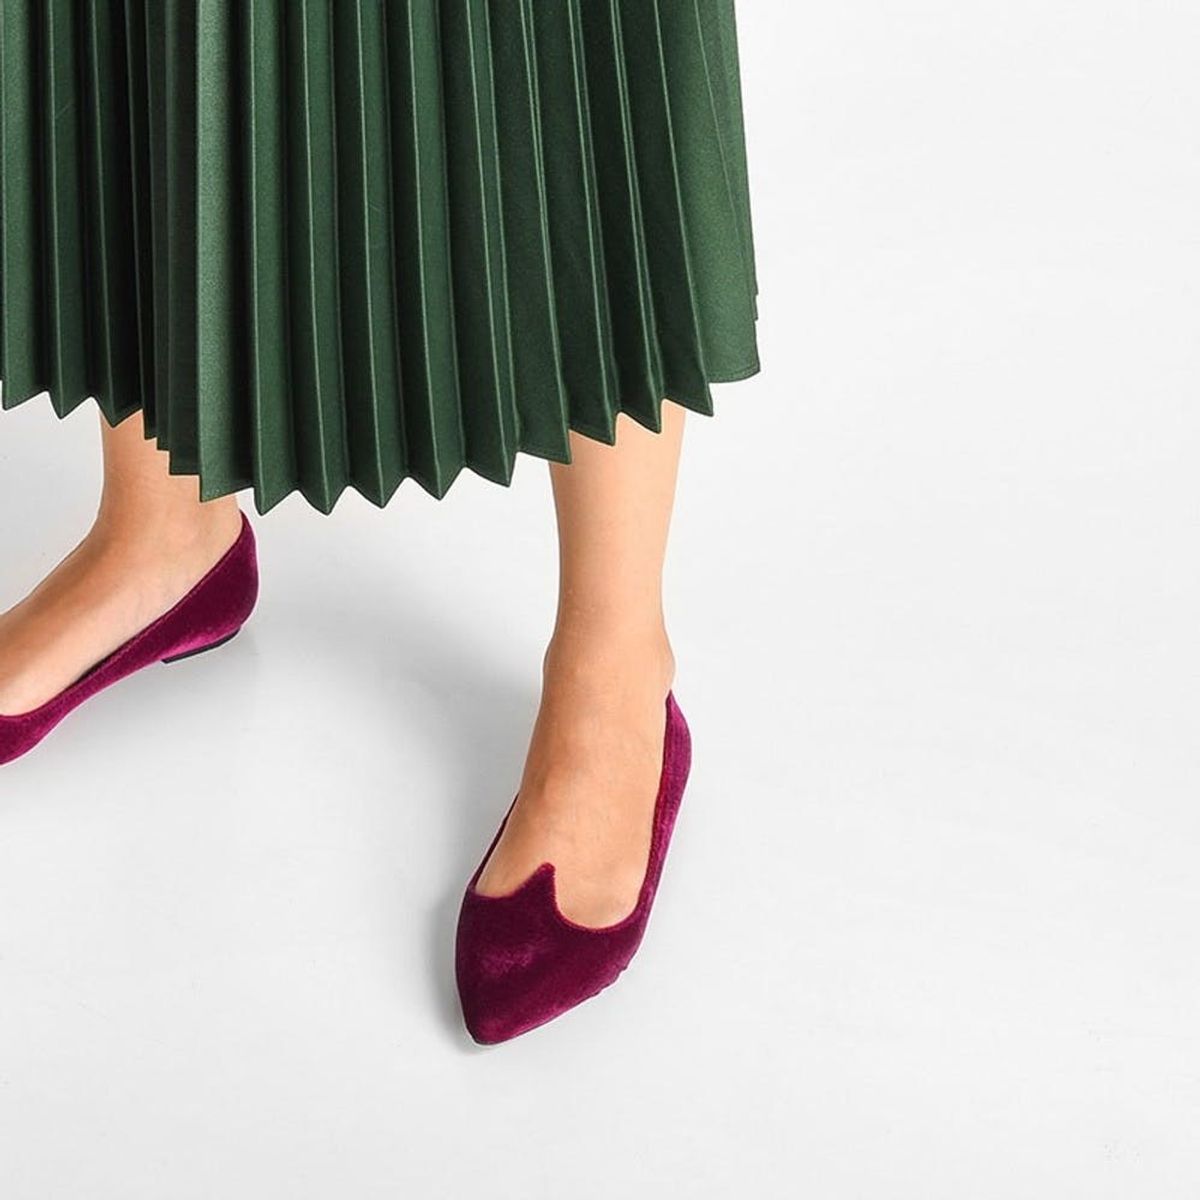 25 Pairs of Velvet Shoes That Are EVERYTHING for Fall